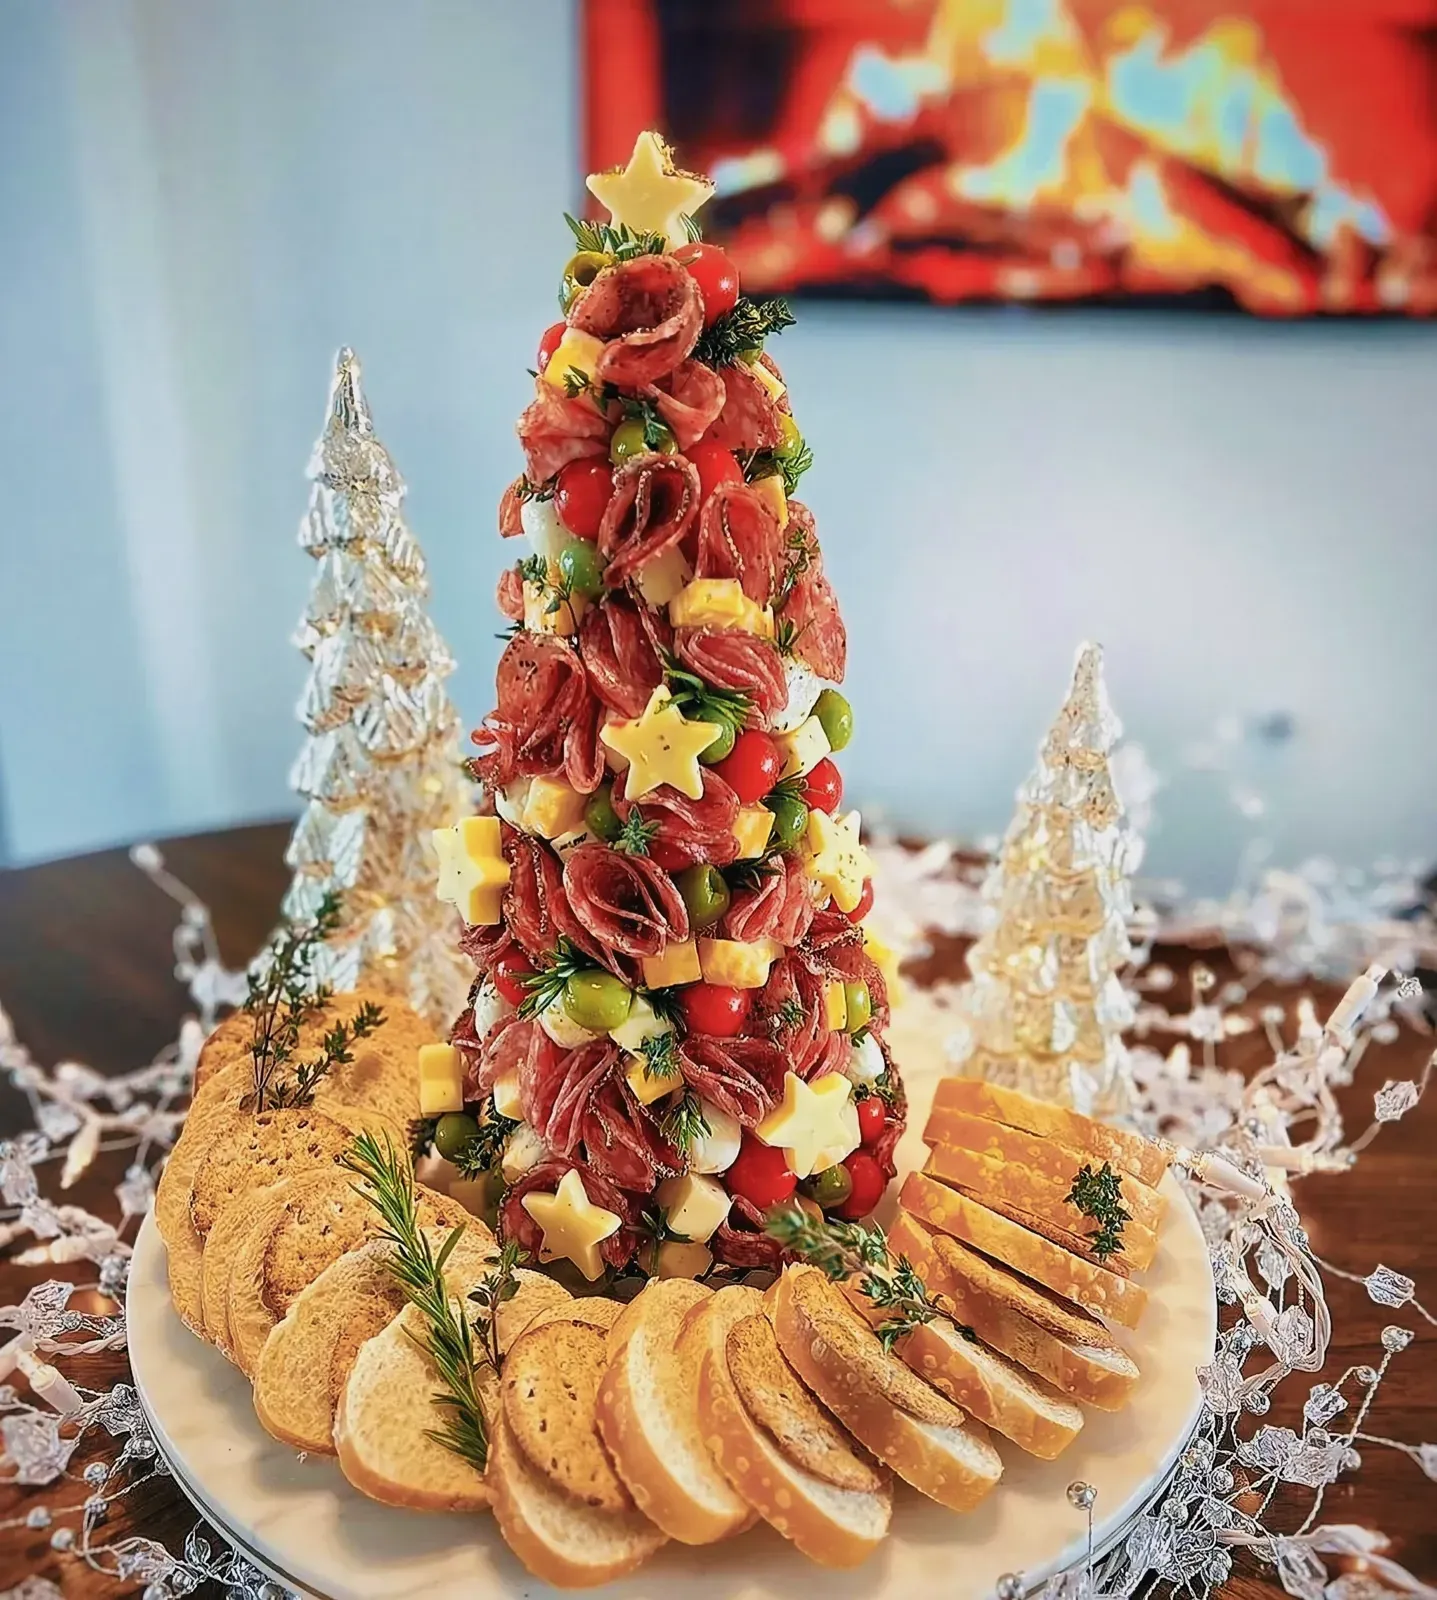 Close-up of a Christmas tree made of baked goods surrounded by an array of delicious finger foods.